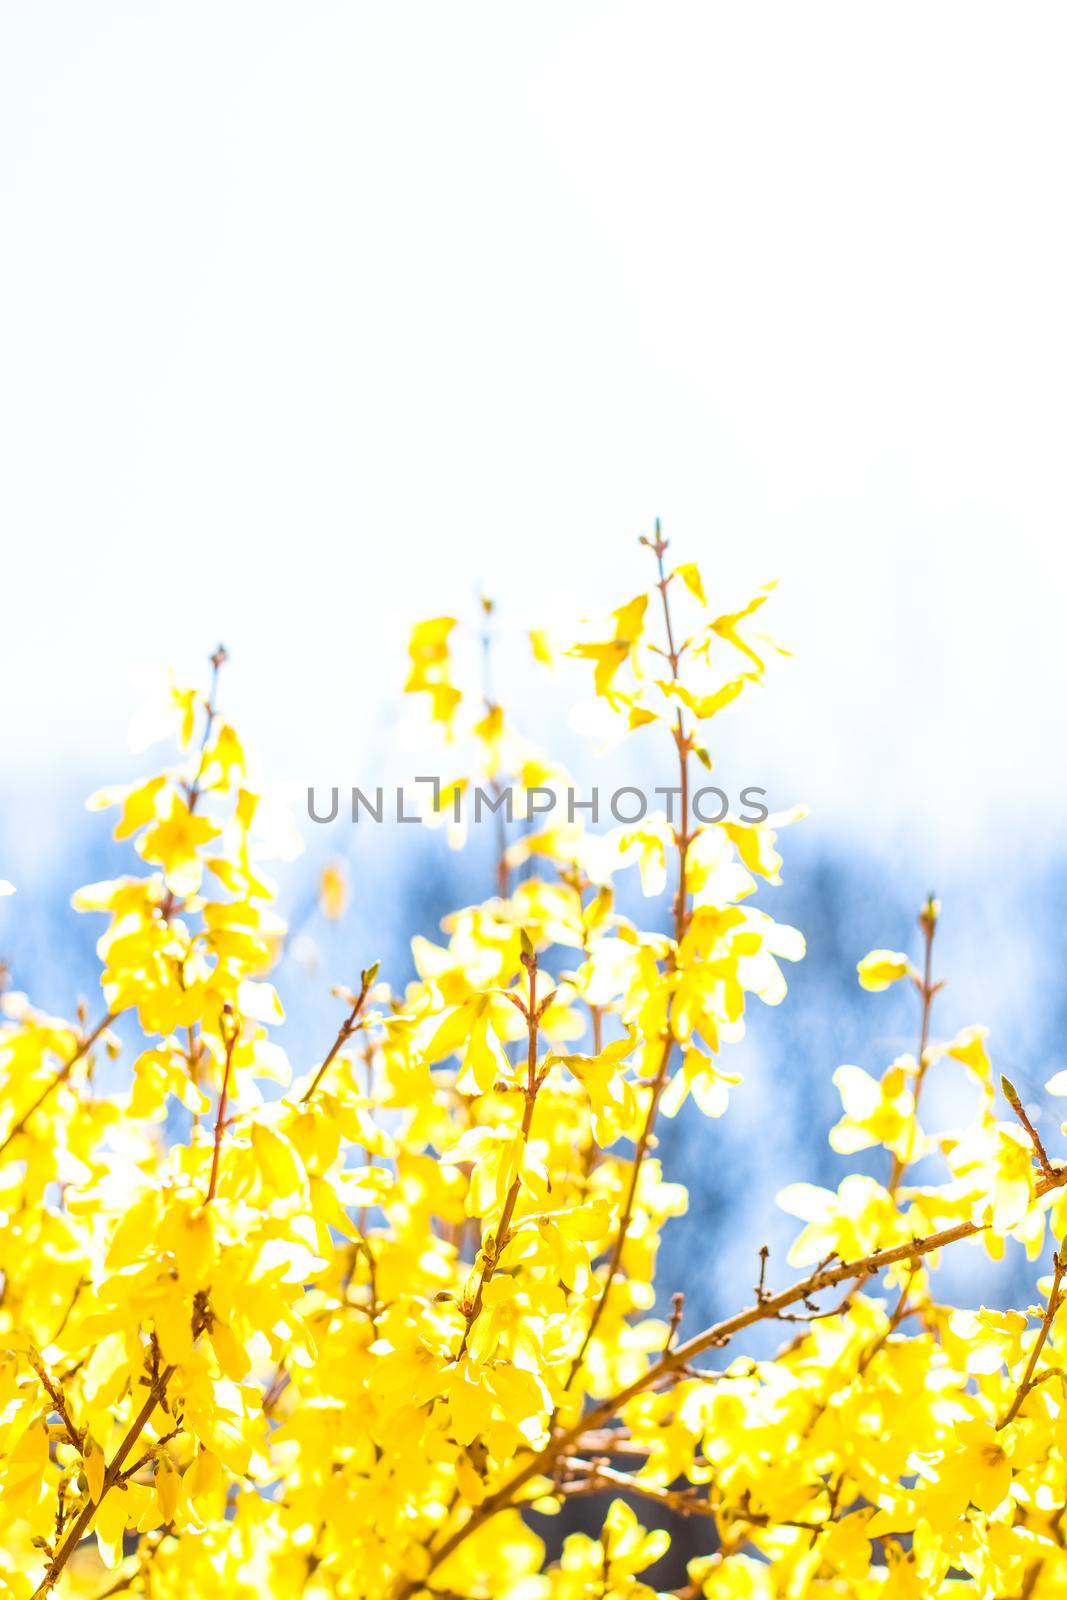 Nature in spring, wedding invitation and floral composition concept - Beautiful yellow flowers and blue sky as background